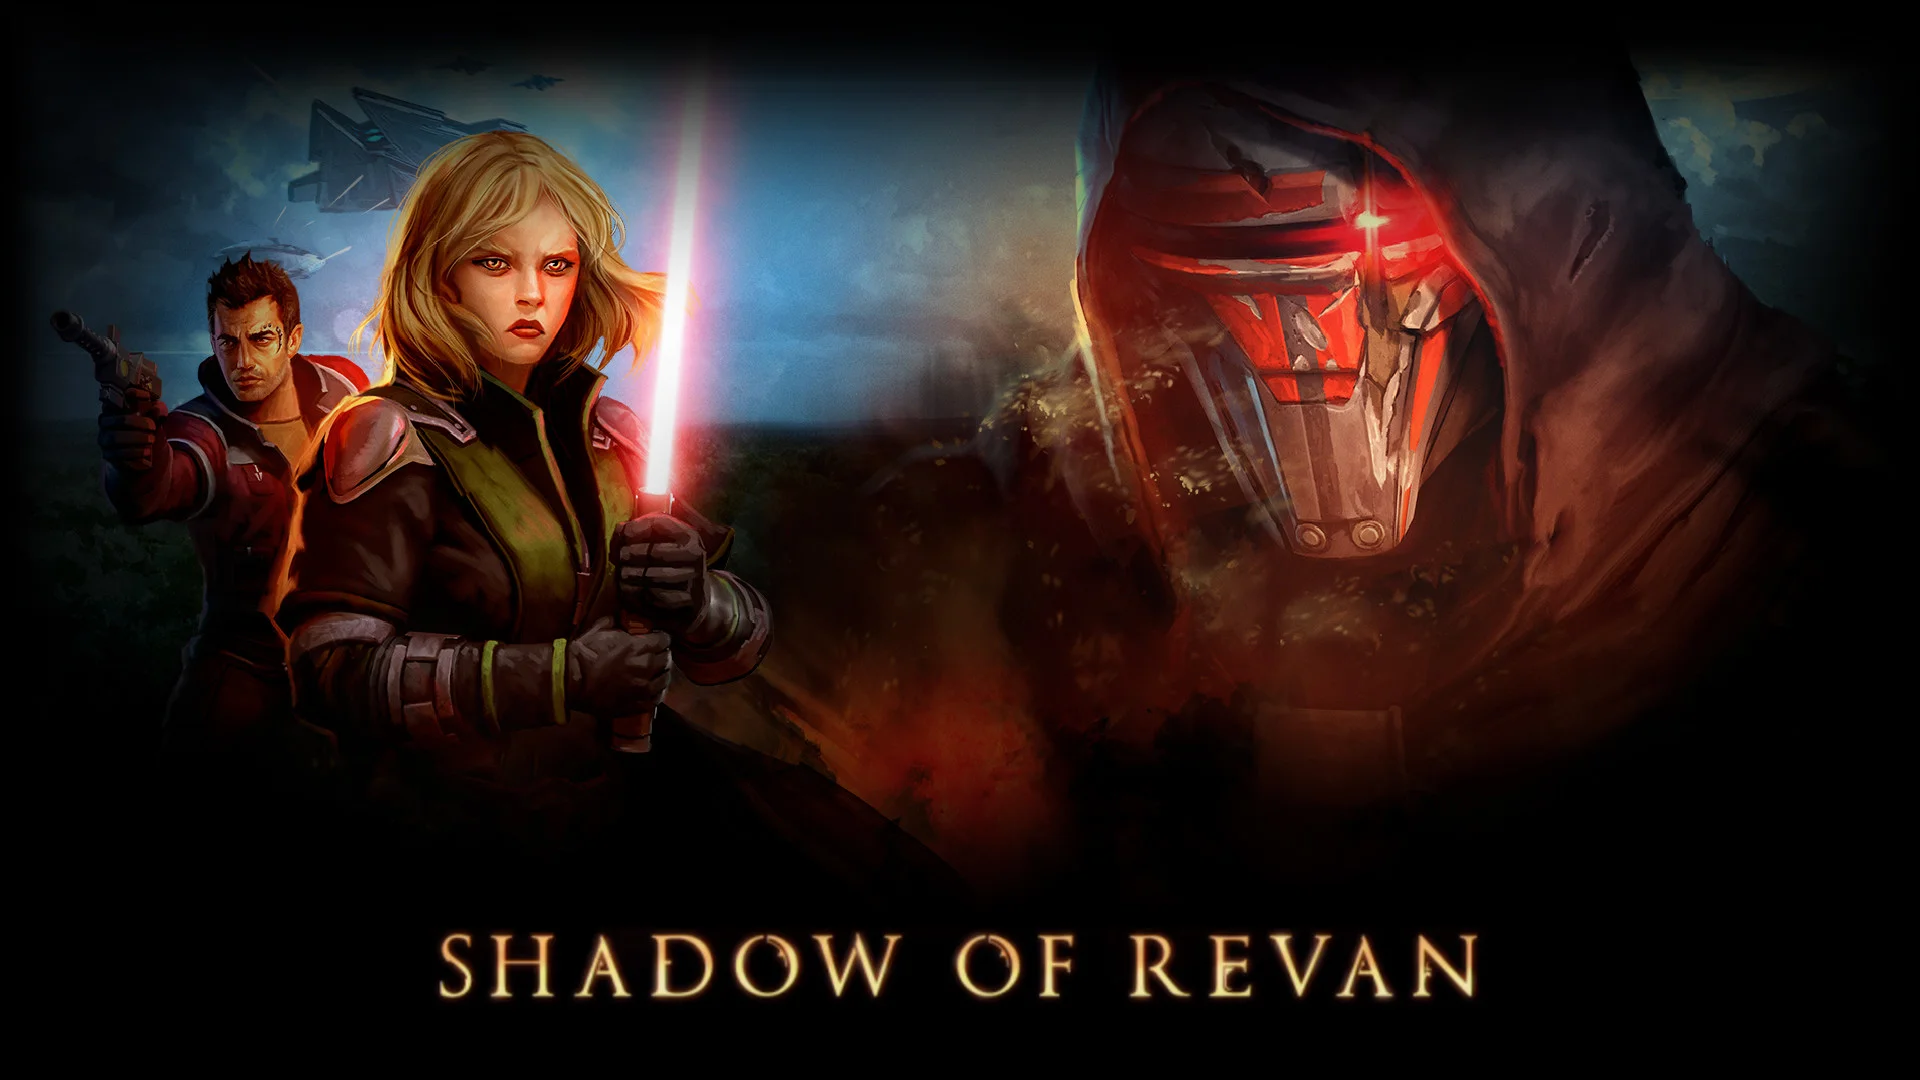 Shadow of Revan Wallpaper w / Text 1920 by 1200 1920 by 1080